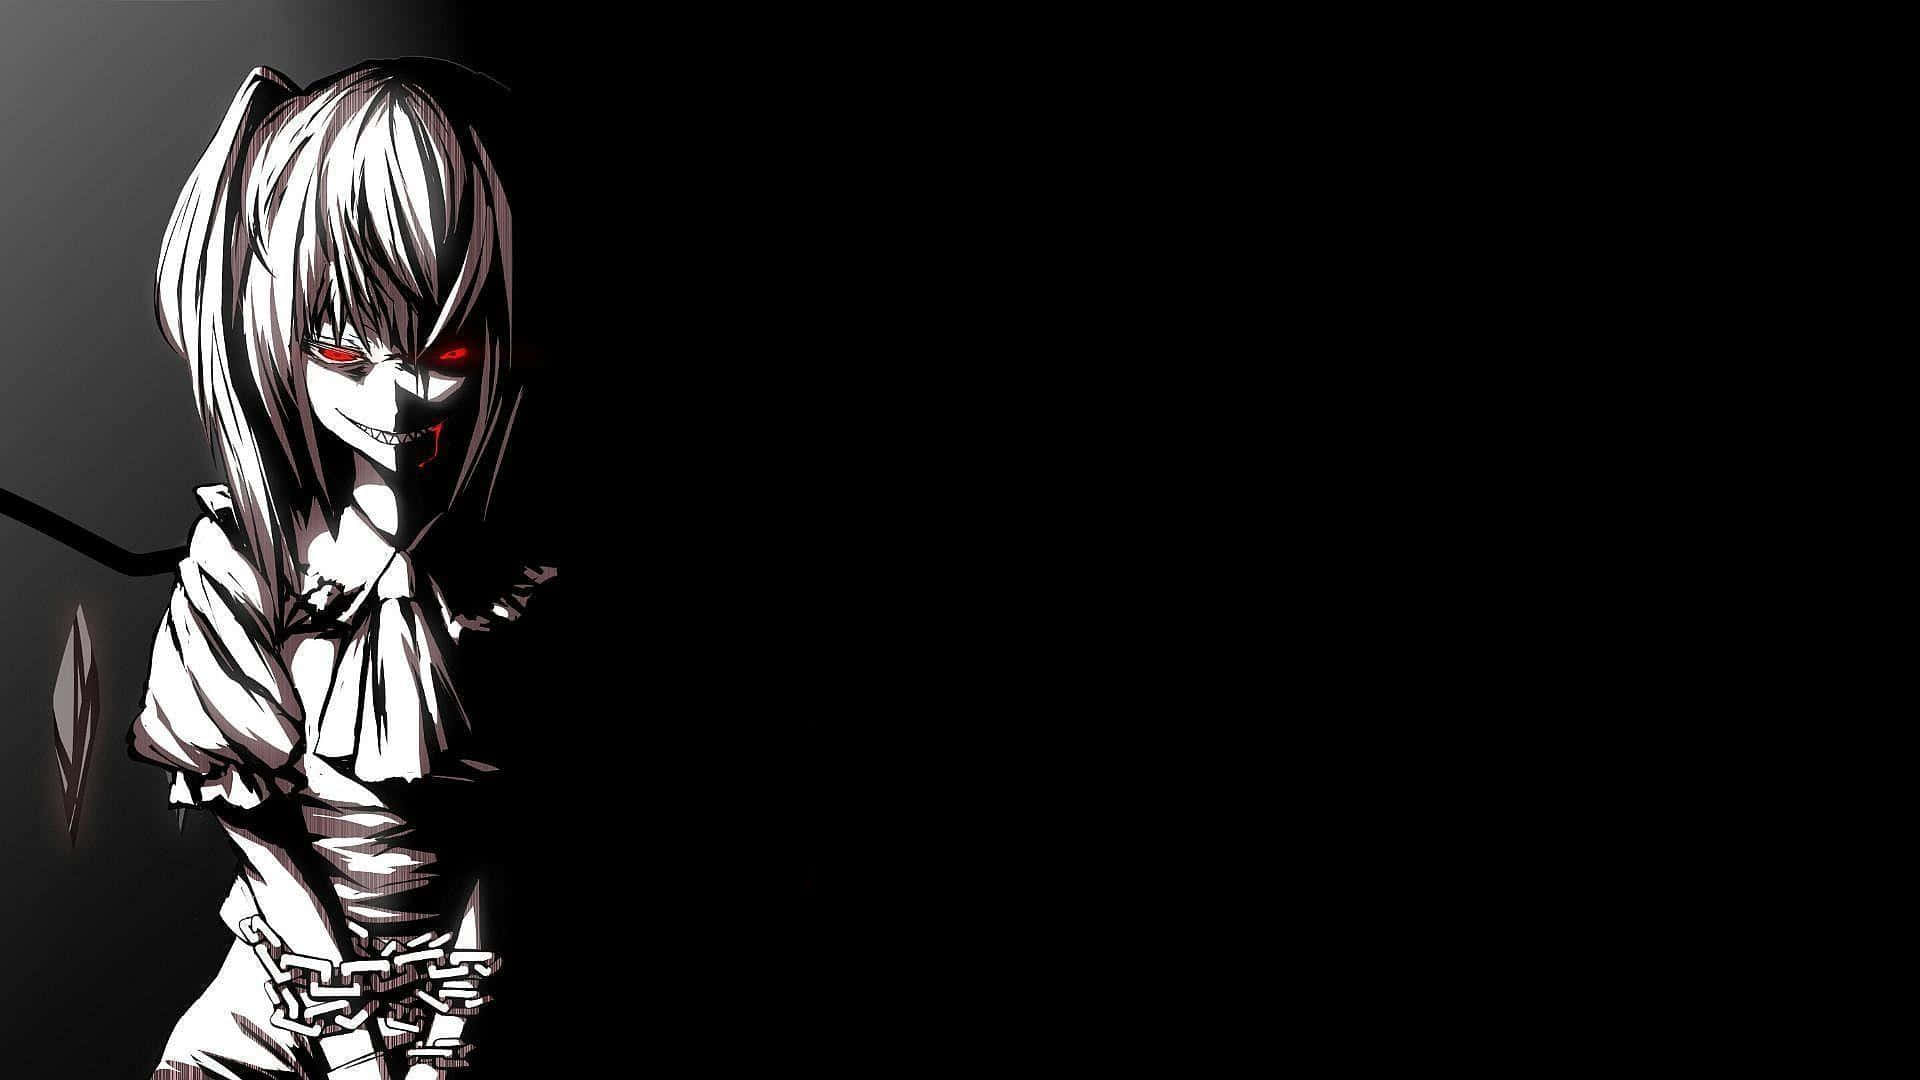 Dark Anime Girl, Mysterious and Engaging Wallpaper